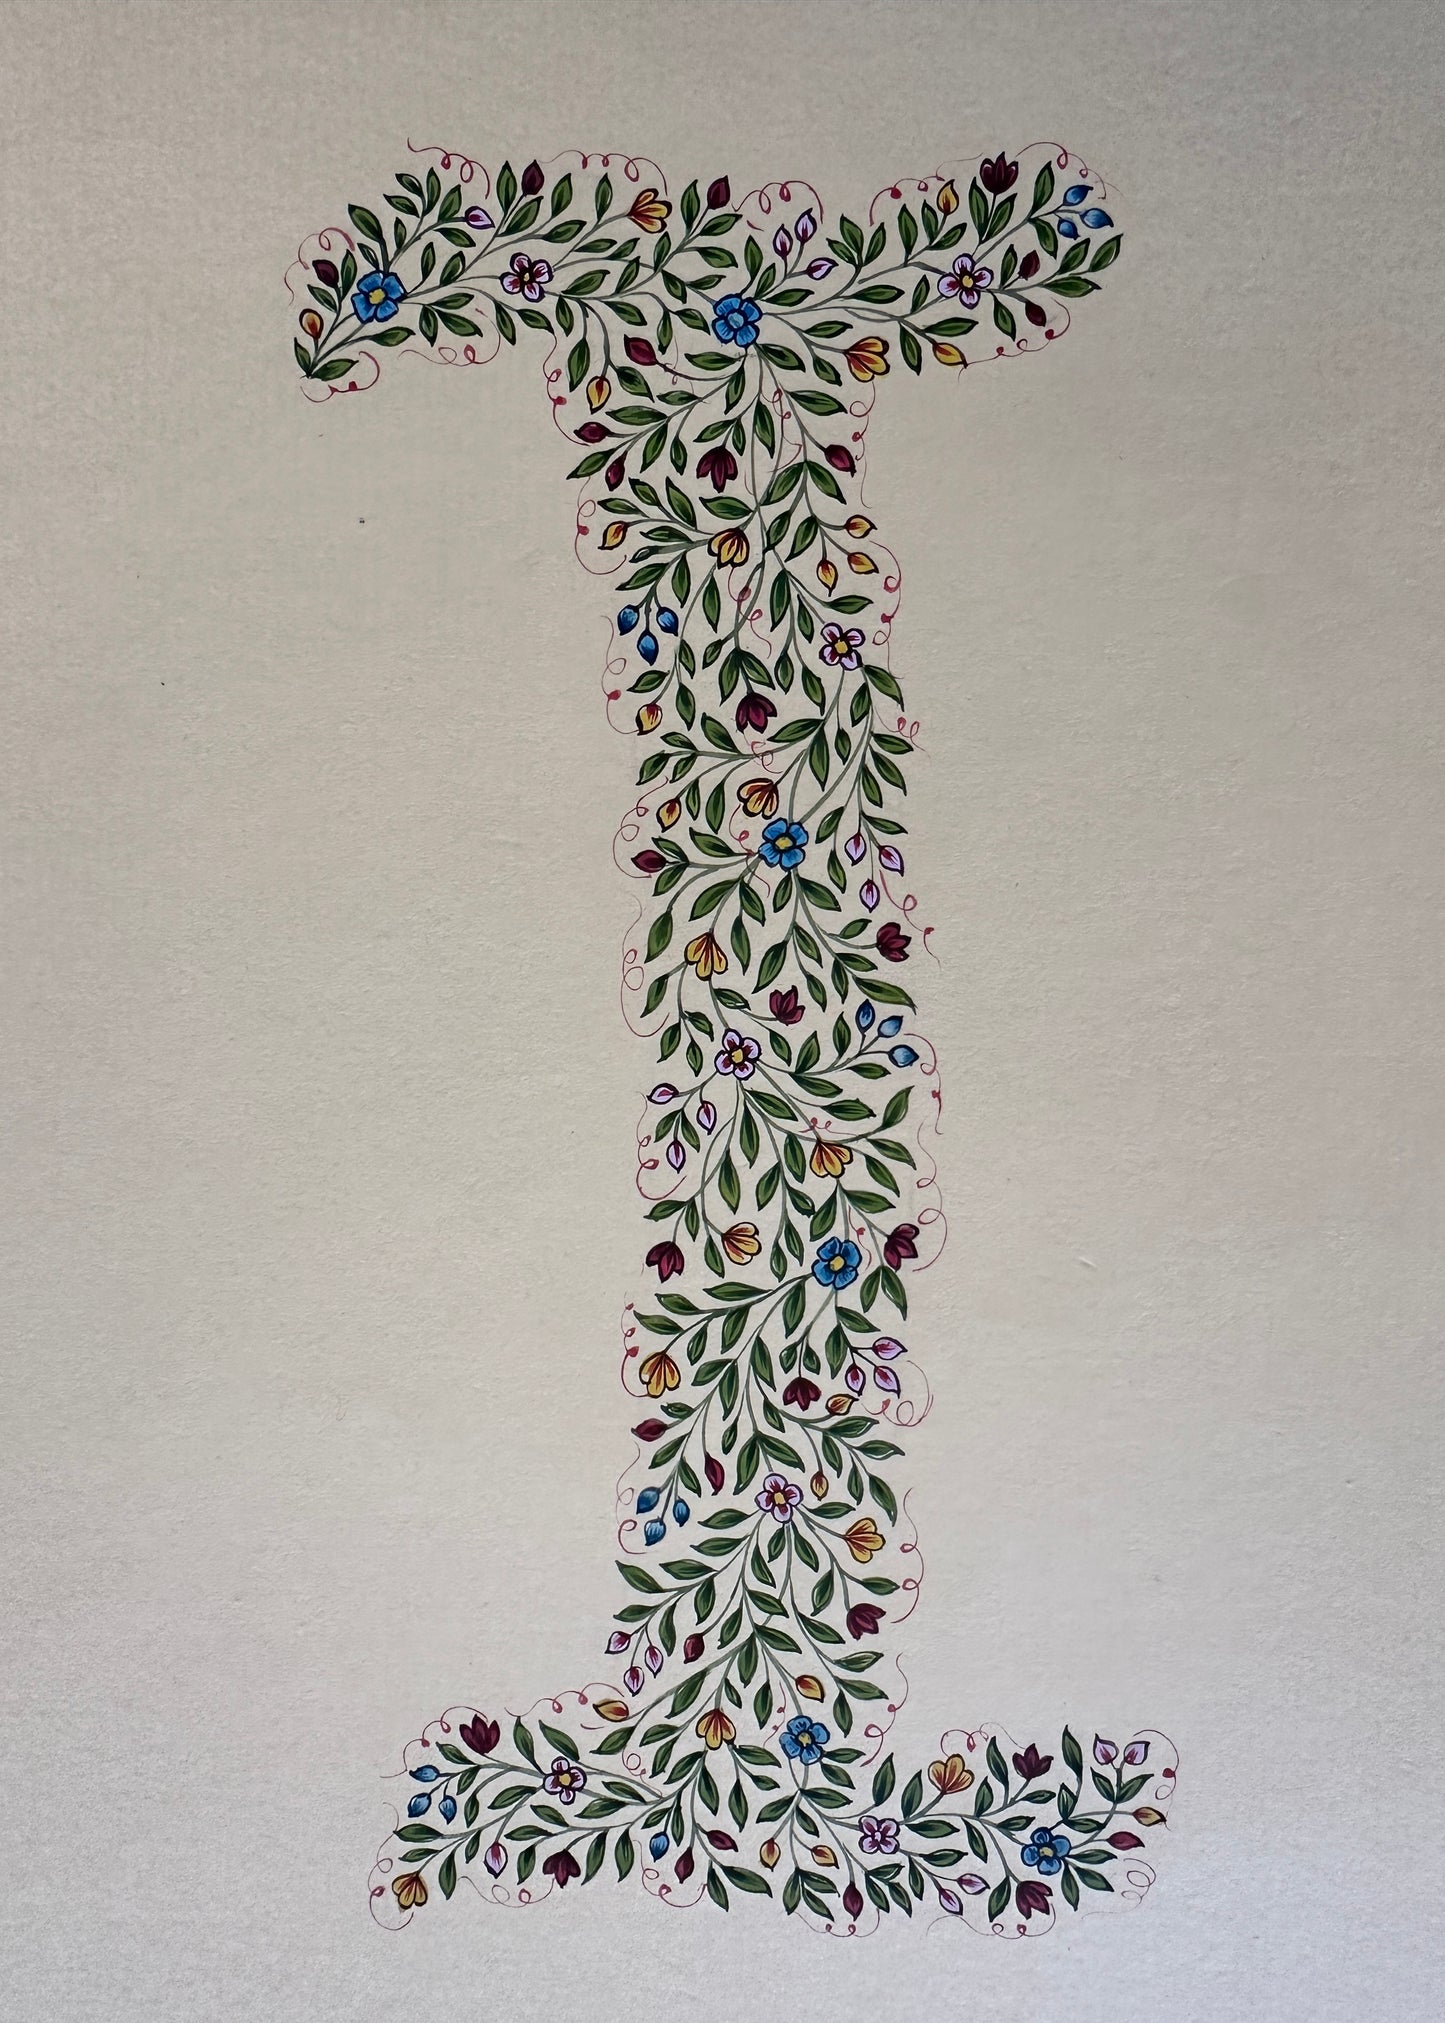 Floral initial Painting (1)